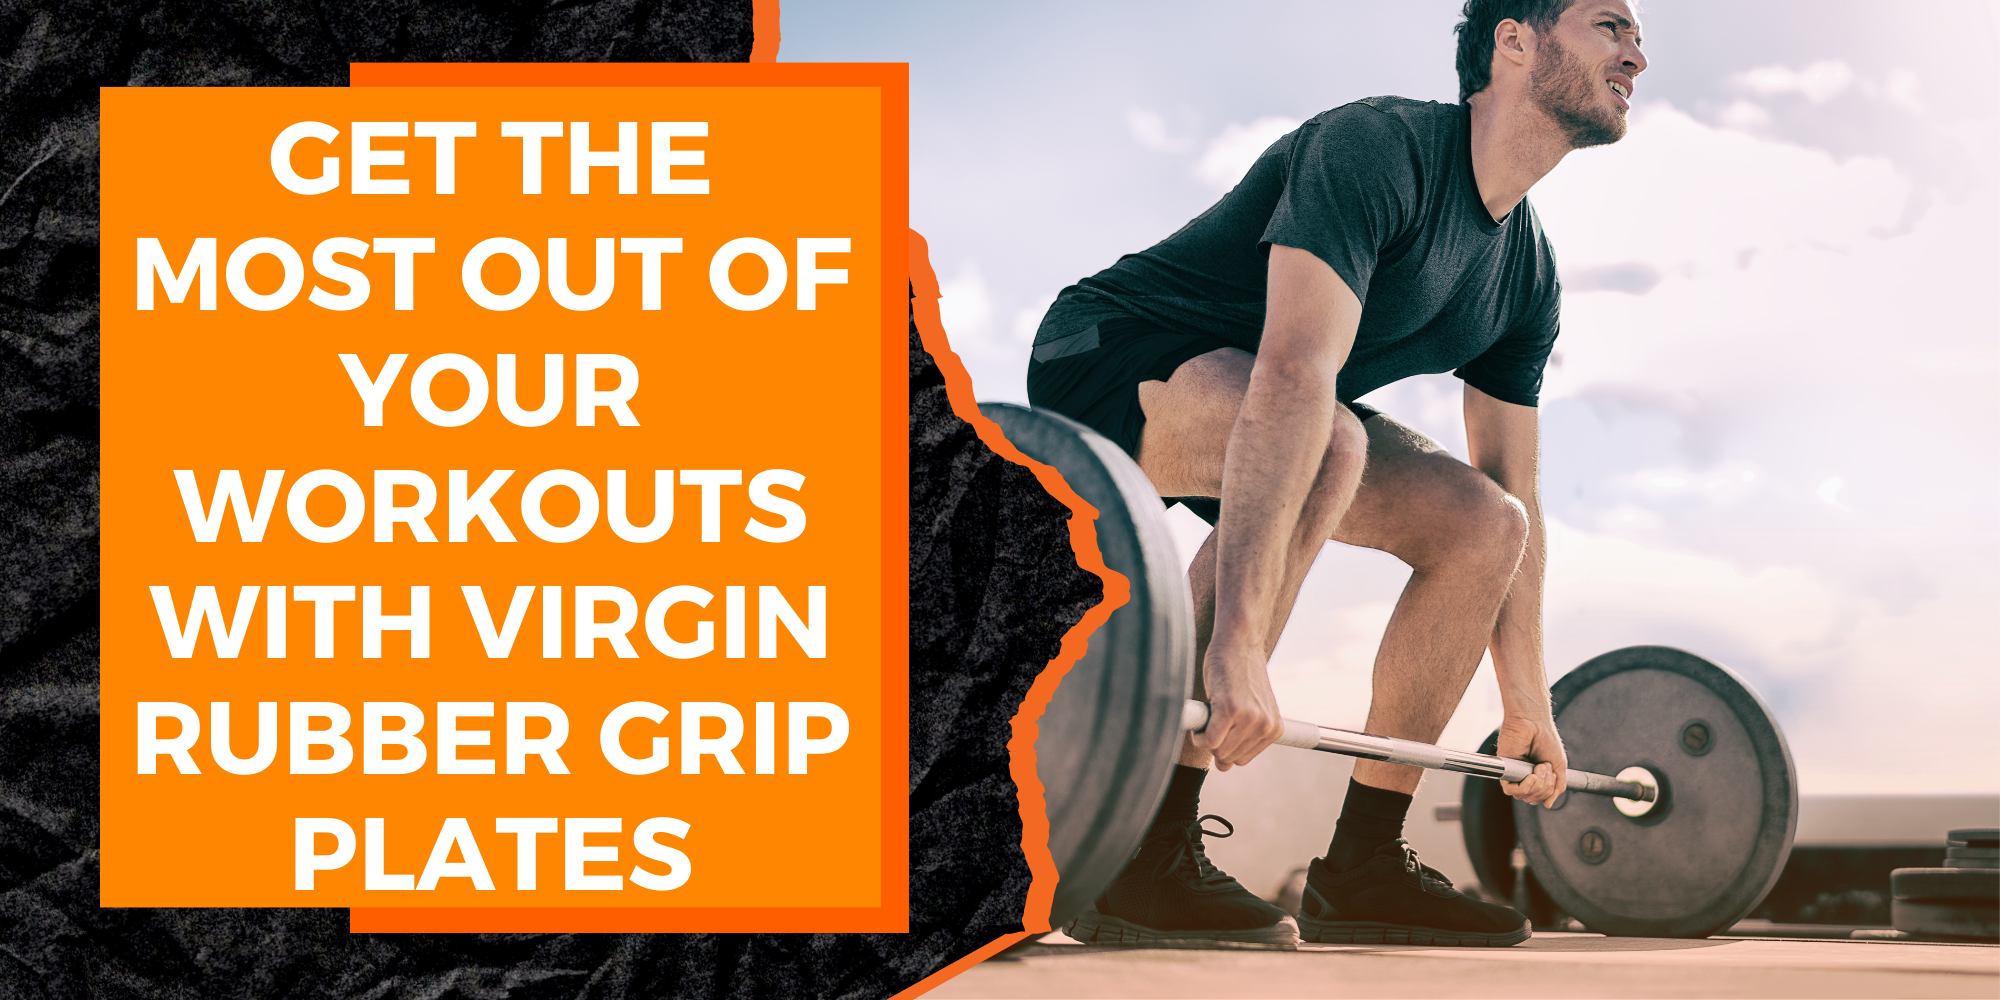 Get the Most Out of Your Workouts with Virgin Rubber Grip Plates